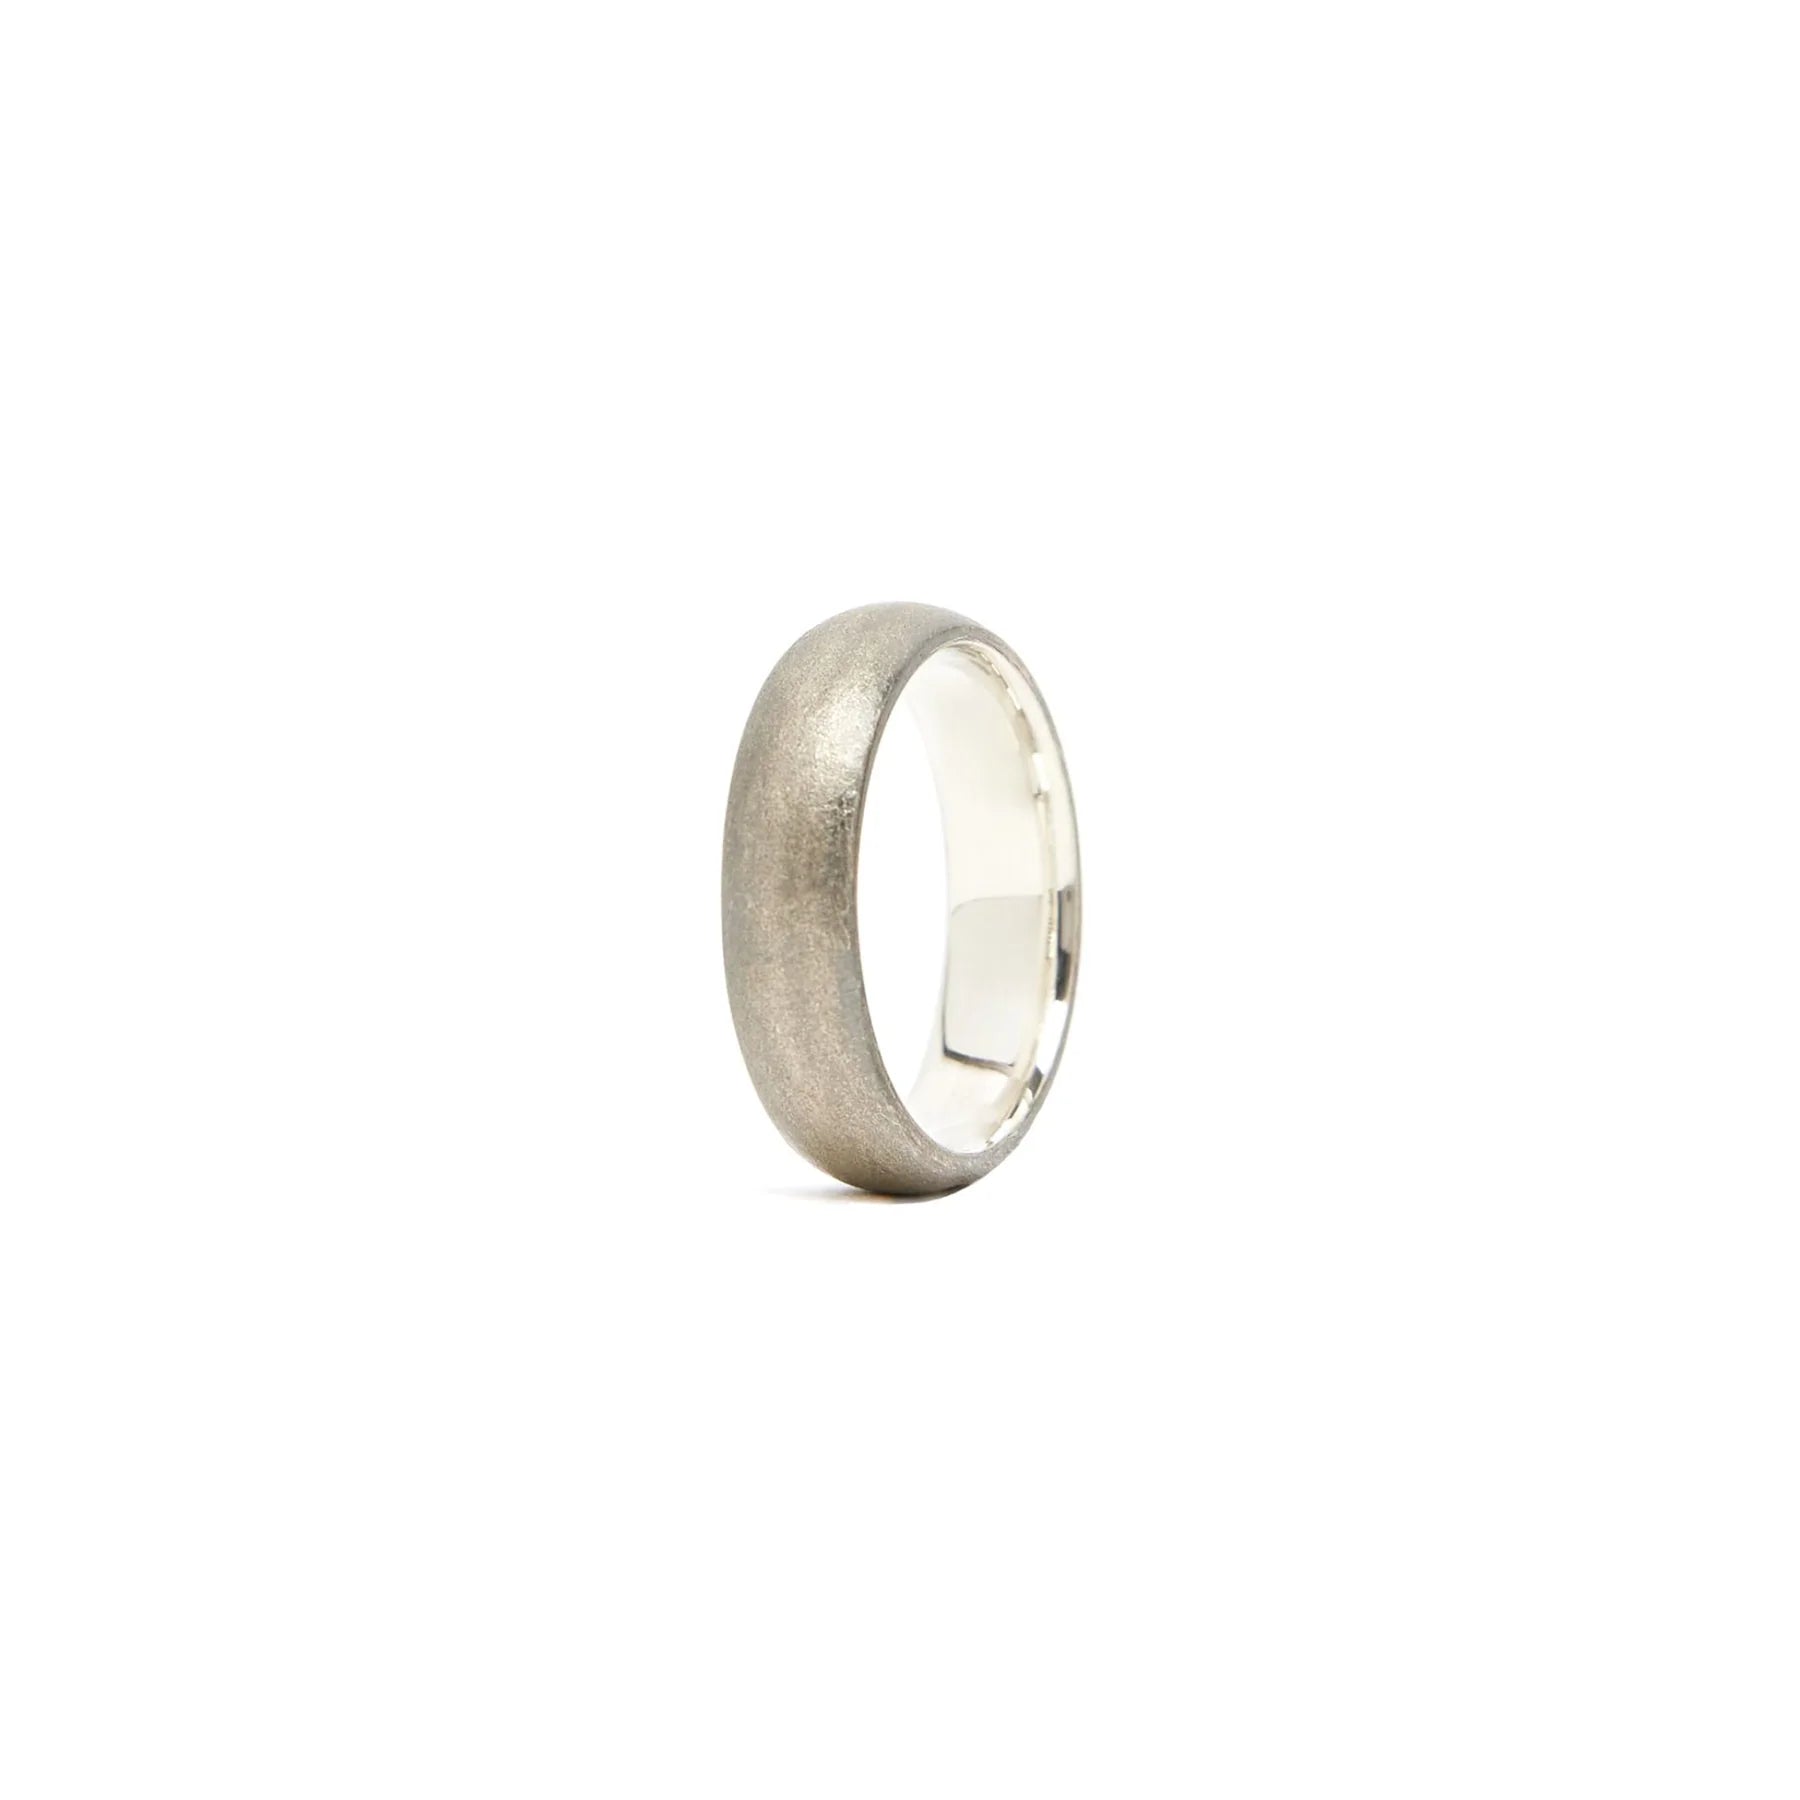 Stude Baker - Lodge Ring 6mm - Sterling Silver-Men's Accessories-L-Yaletown-Vancouver-Surrey-Canada